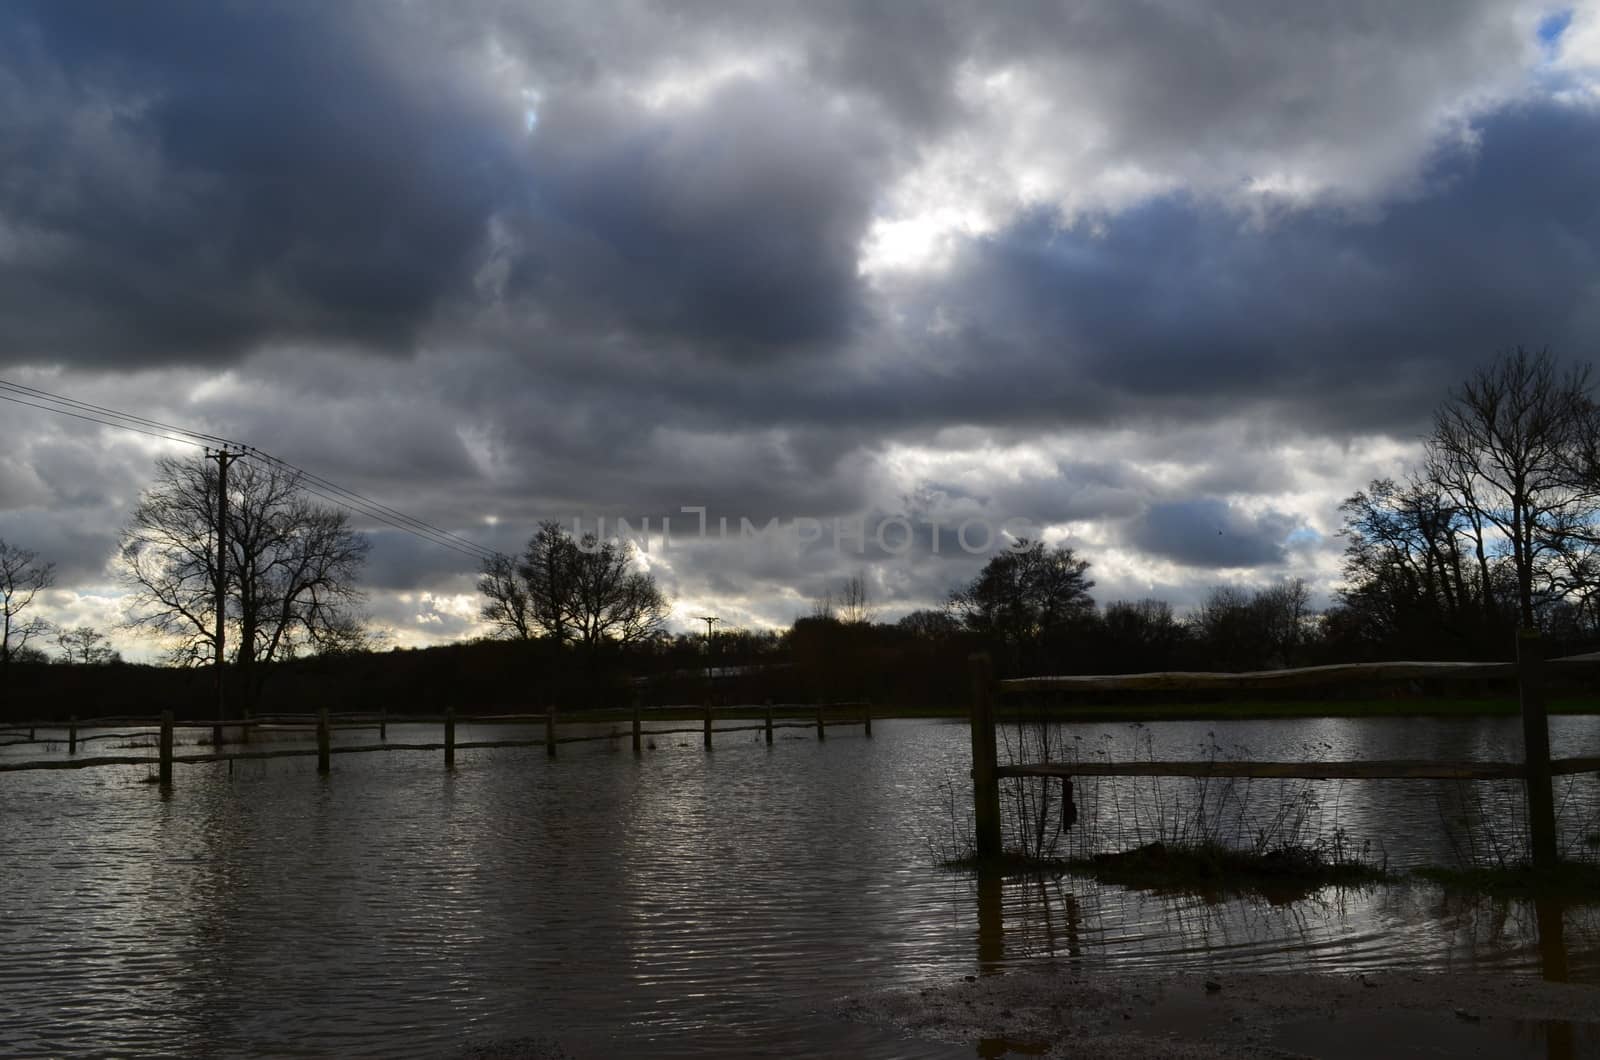 Natural flood plain along the banks of the River Ouse in the English County of Sussex.2014 saw Britain battered by rain the worst for over two Centuries.